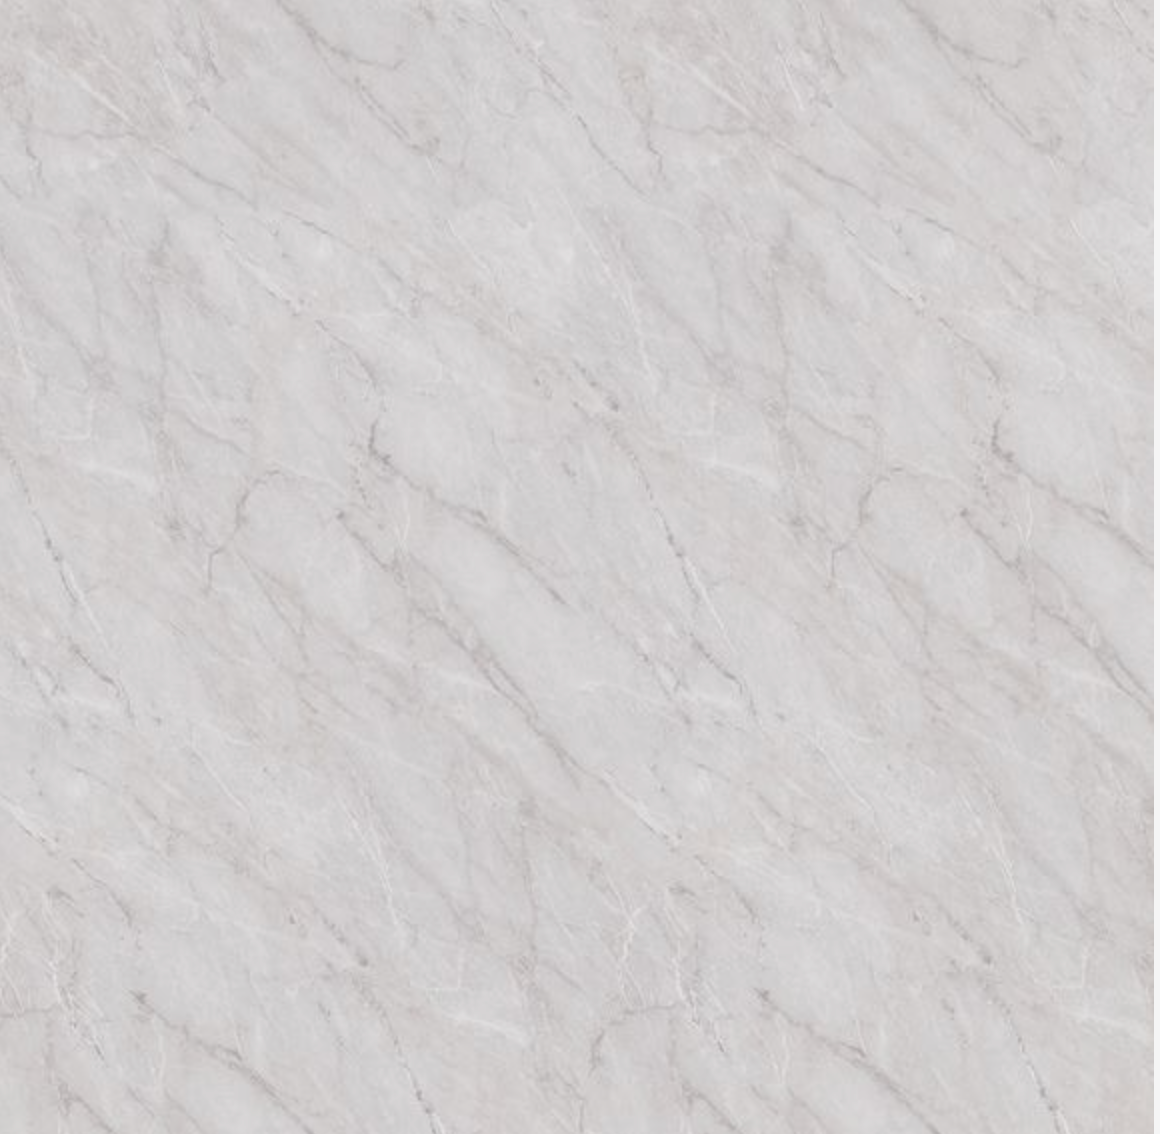 Showerwall Laminate Marble Collection - Apollo Marble